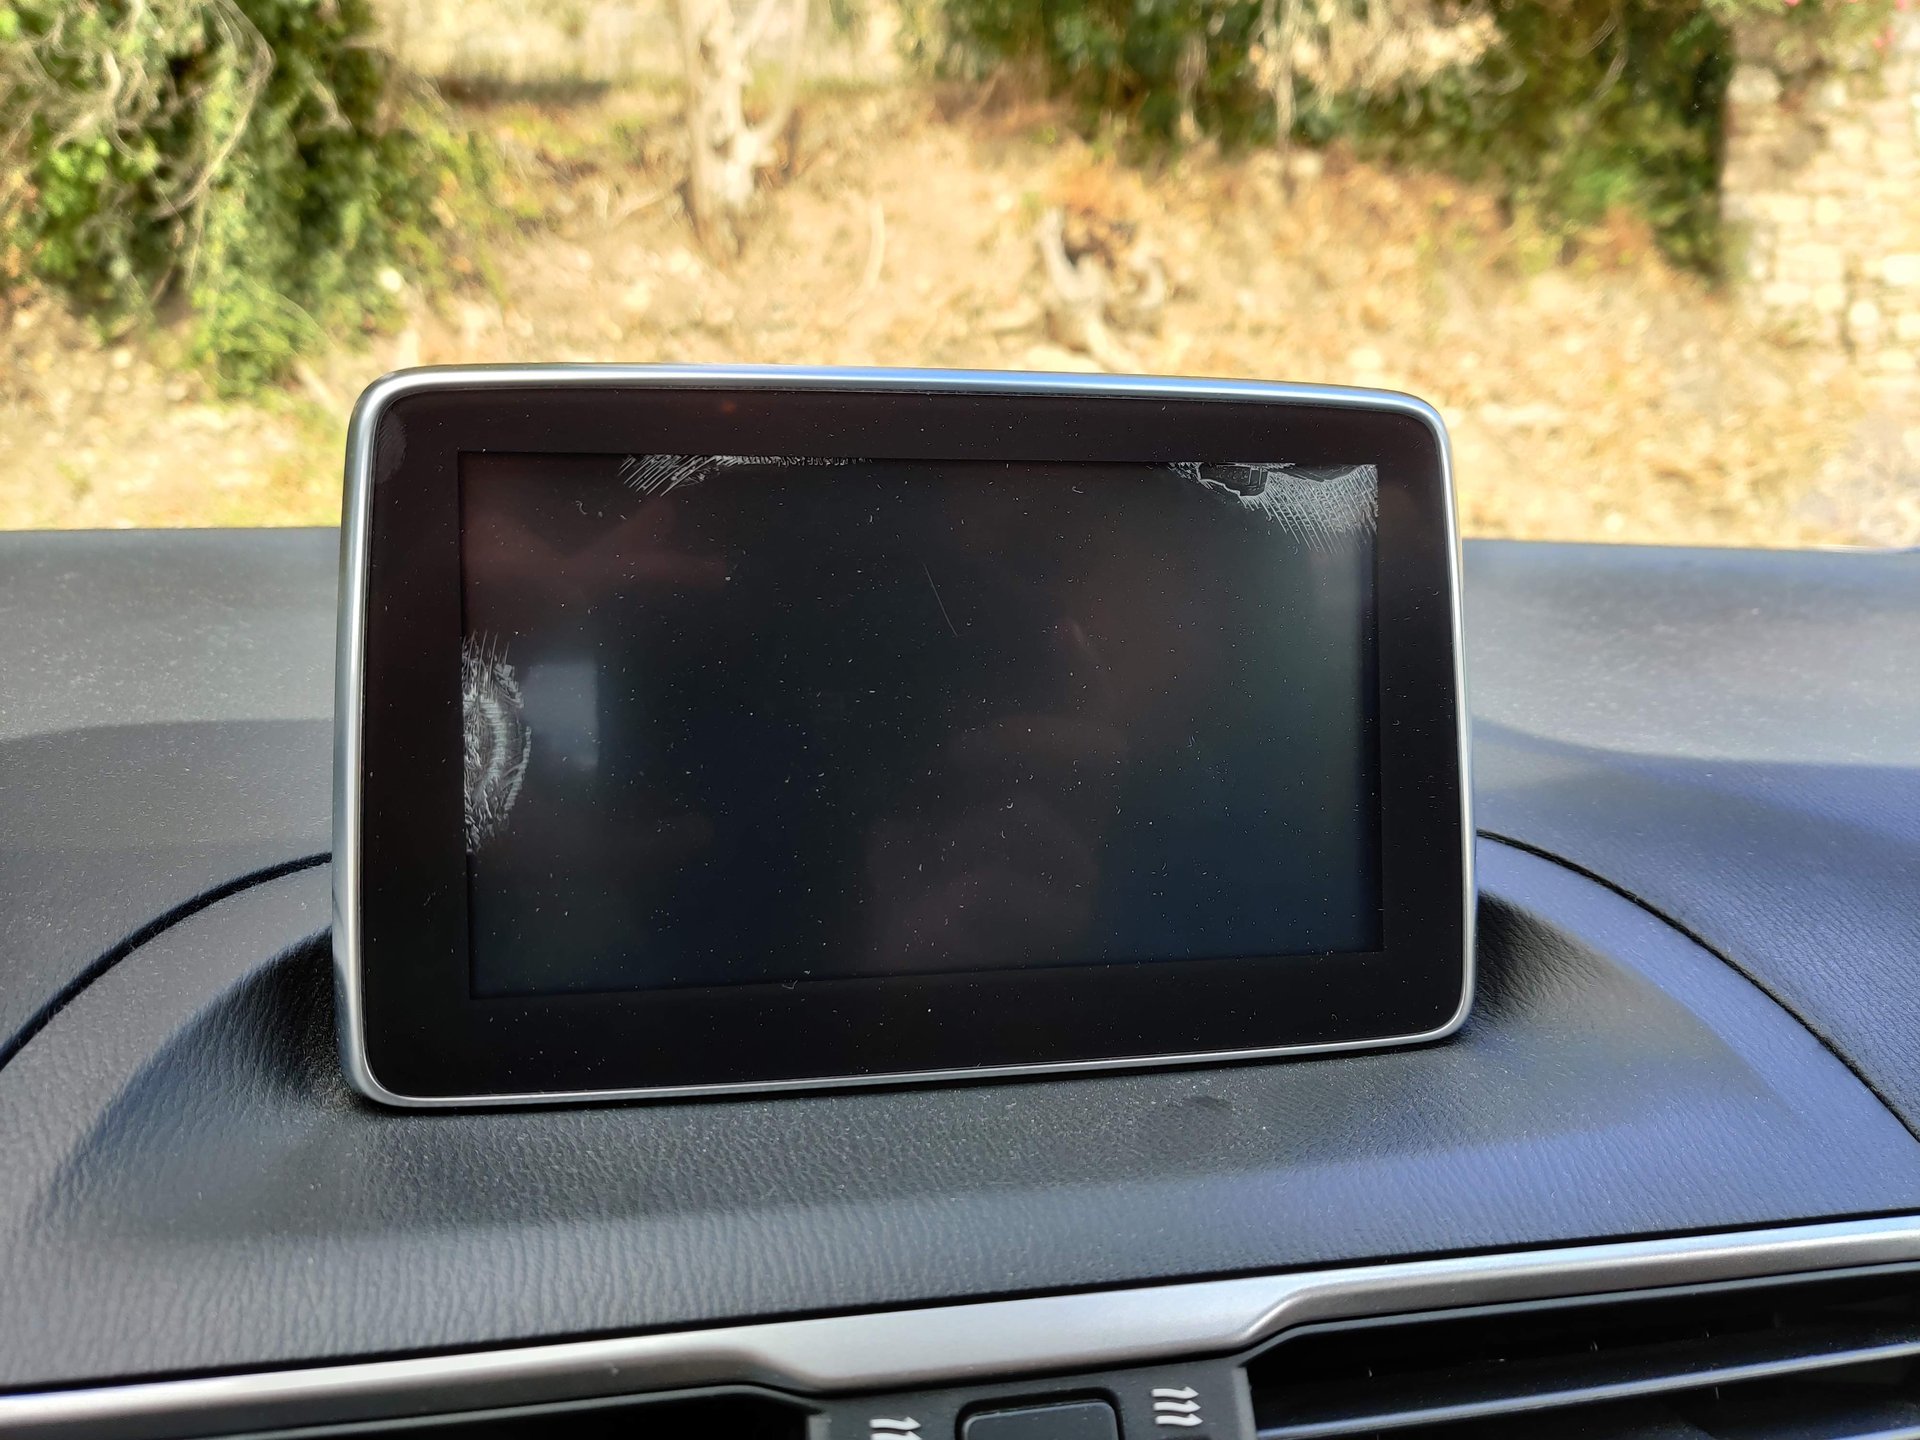 Mazda CONNECT Screen Replacement Service in South Florida FL - 786-355-7660